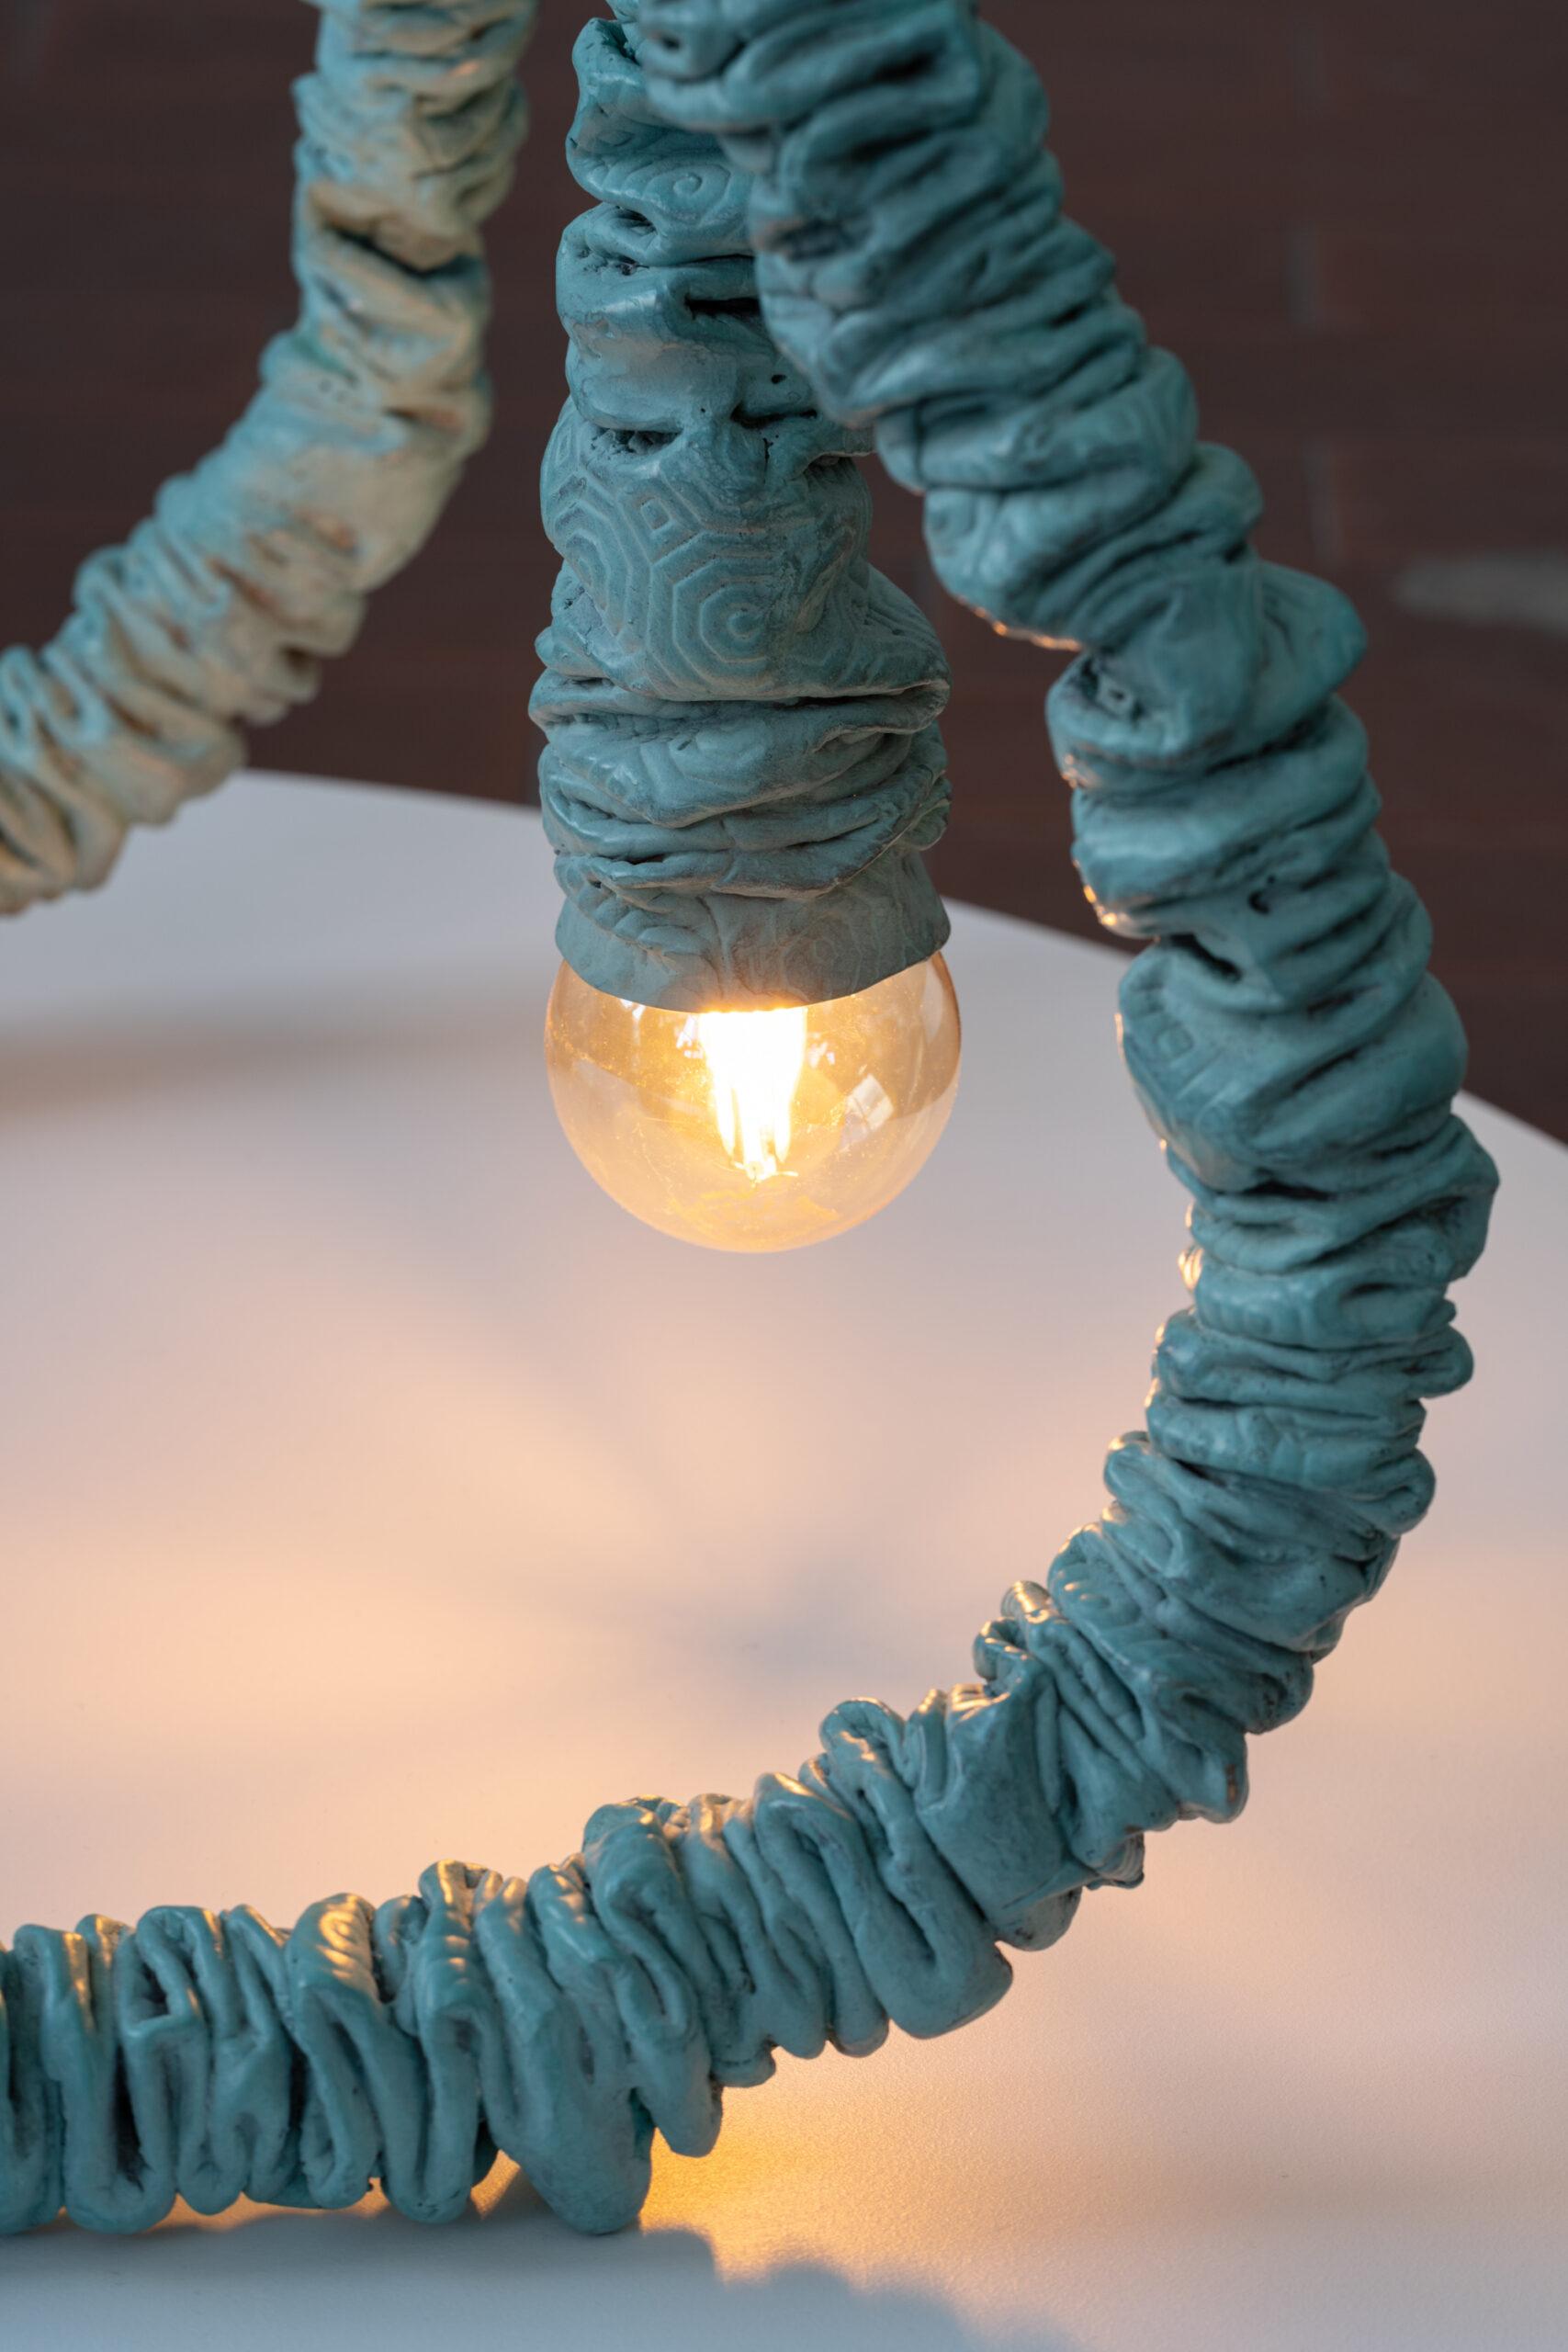 The two luminaires Bump the Lamp of Nicolas Momein, one to be placed on the floor and the other on a piece of furniture, echo his tubular metal sculptures sewn by “Bulgomme”. The “Bulgomme” fabric (evocation of his childhood), generally used as a